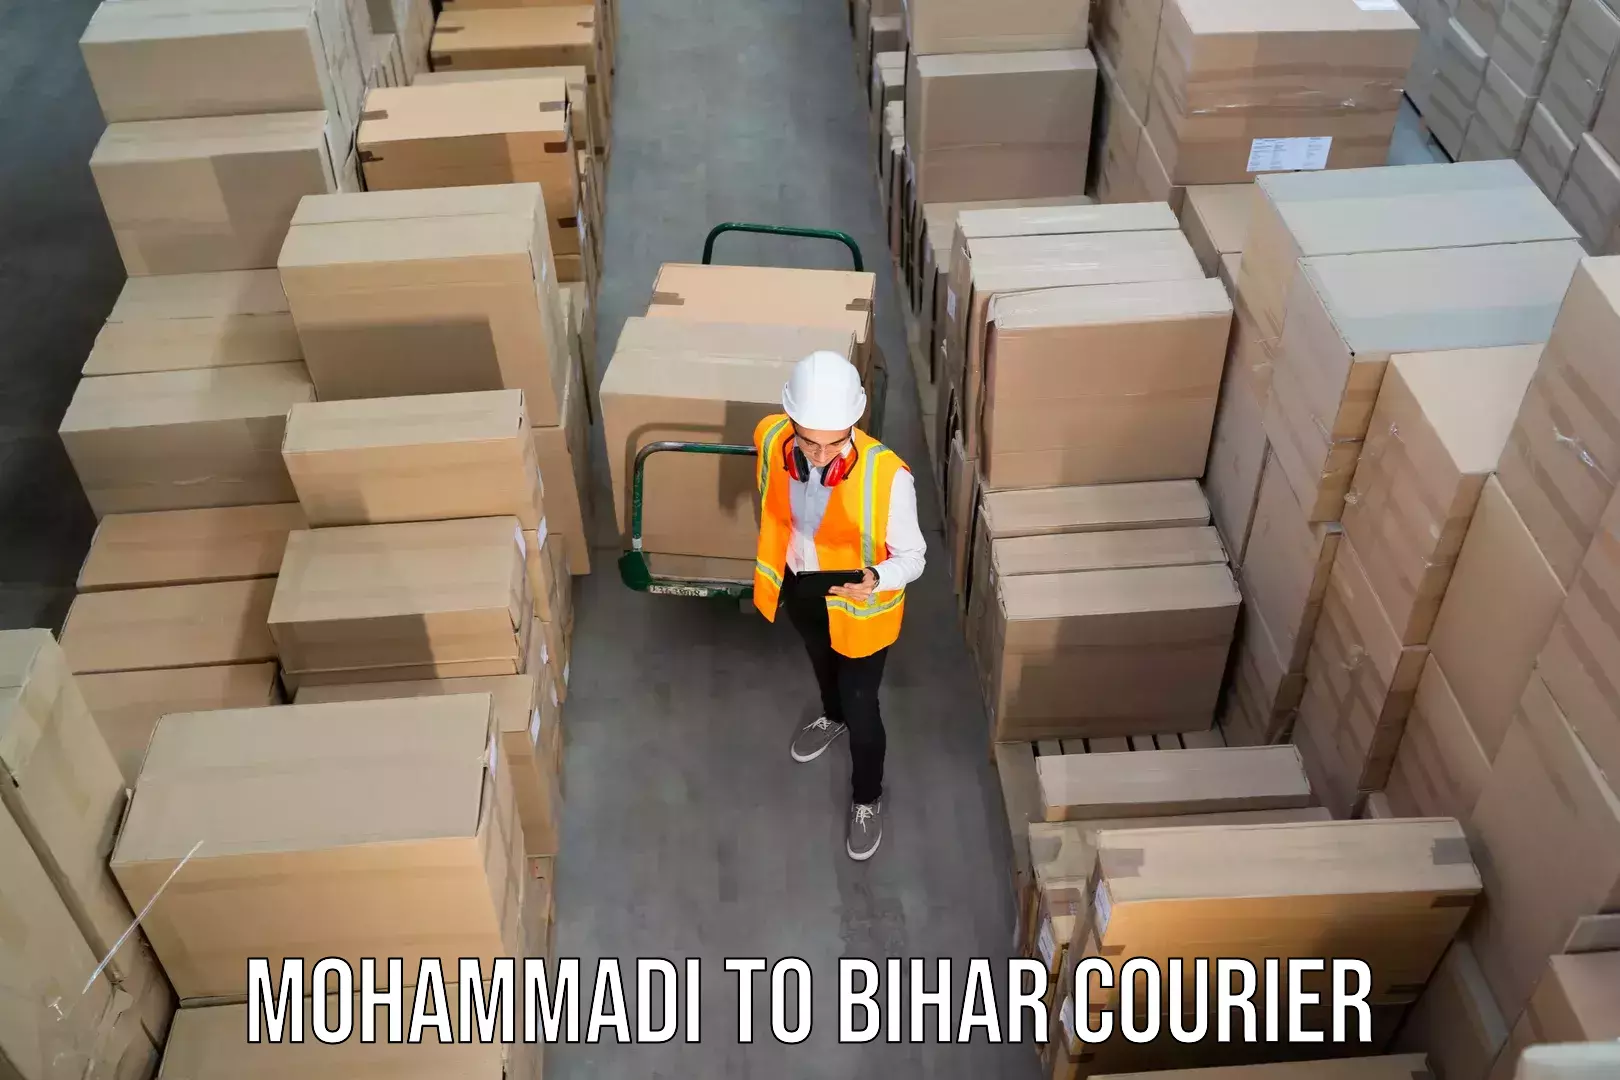 Local delivery service Mohammadi to Bihar